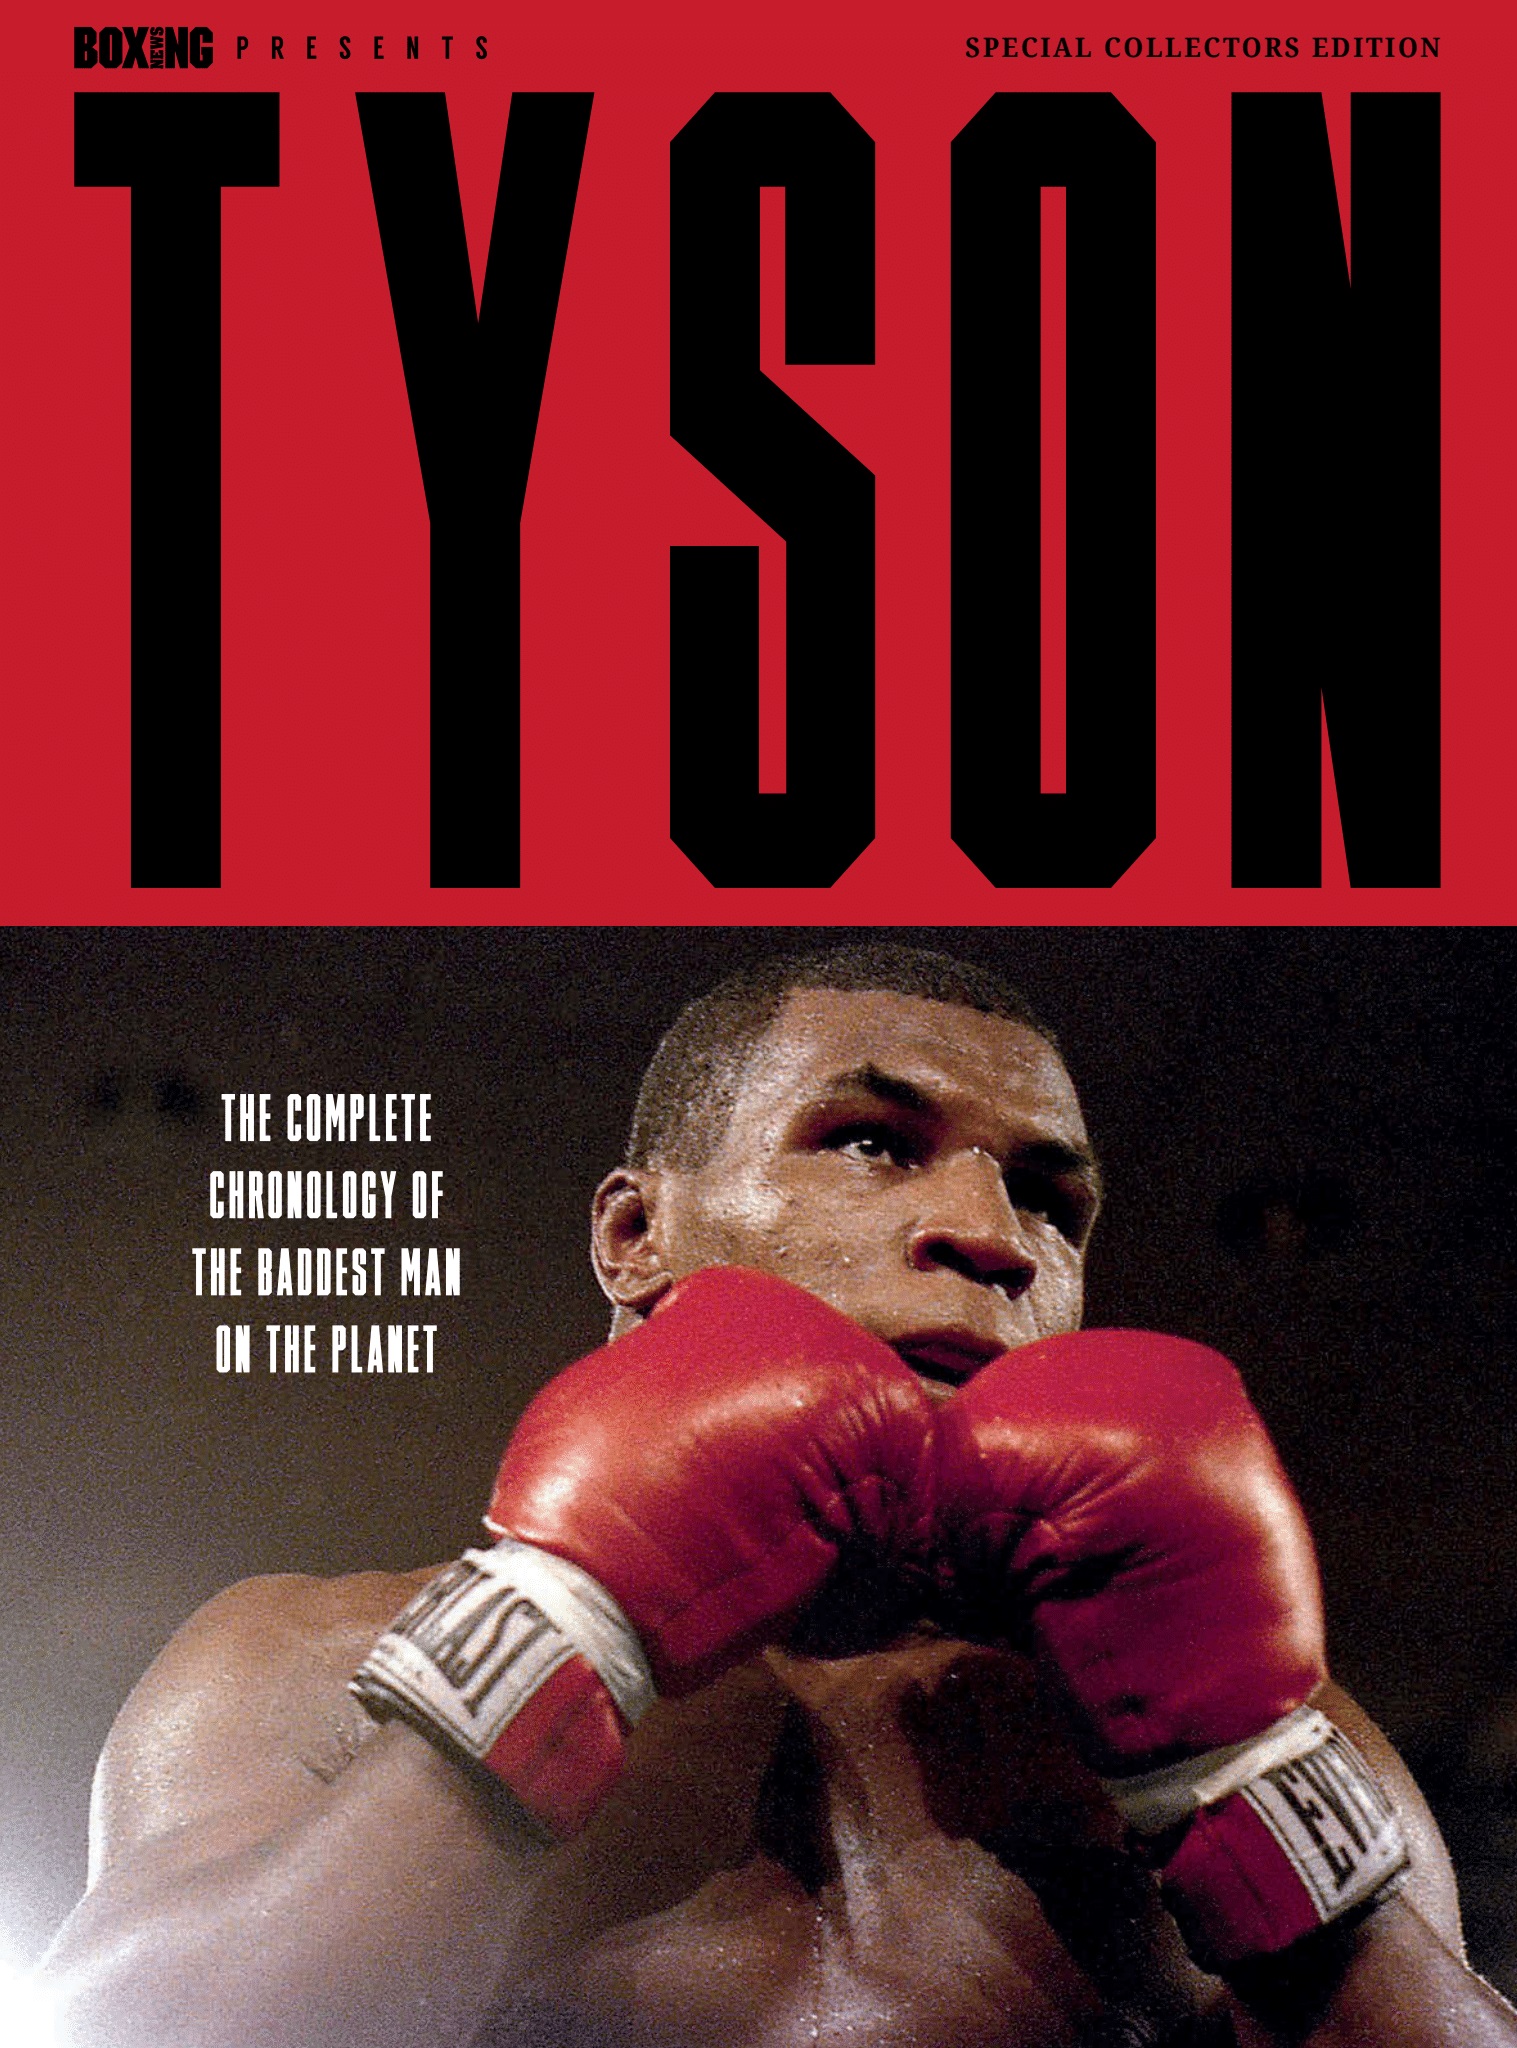 Boxing News Presents Issue 3 - Mike Tyson